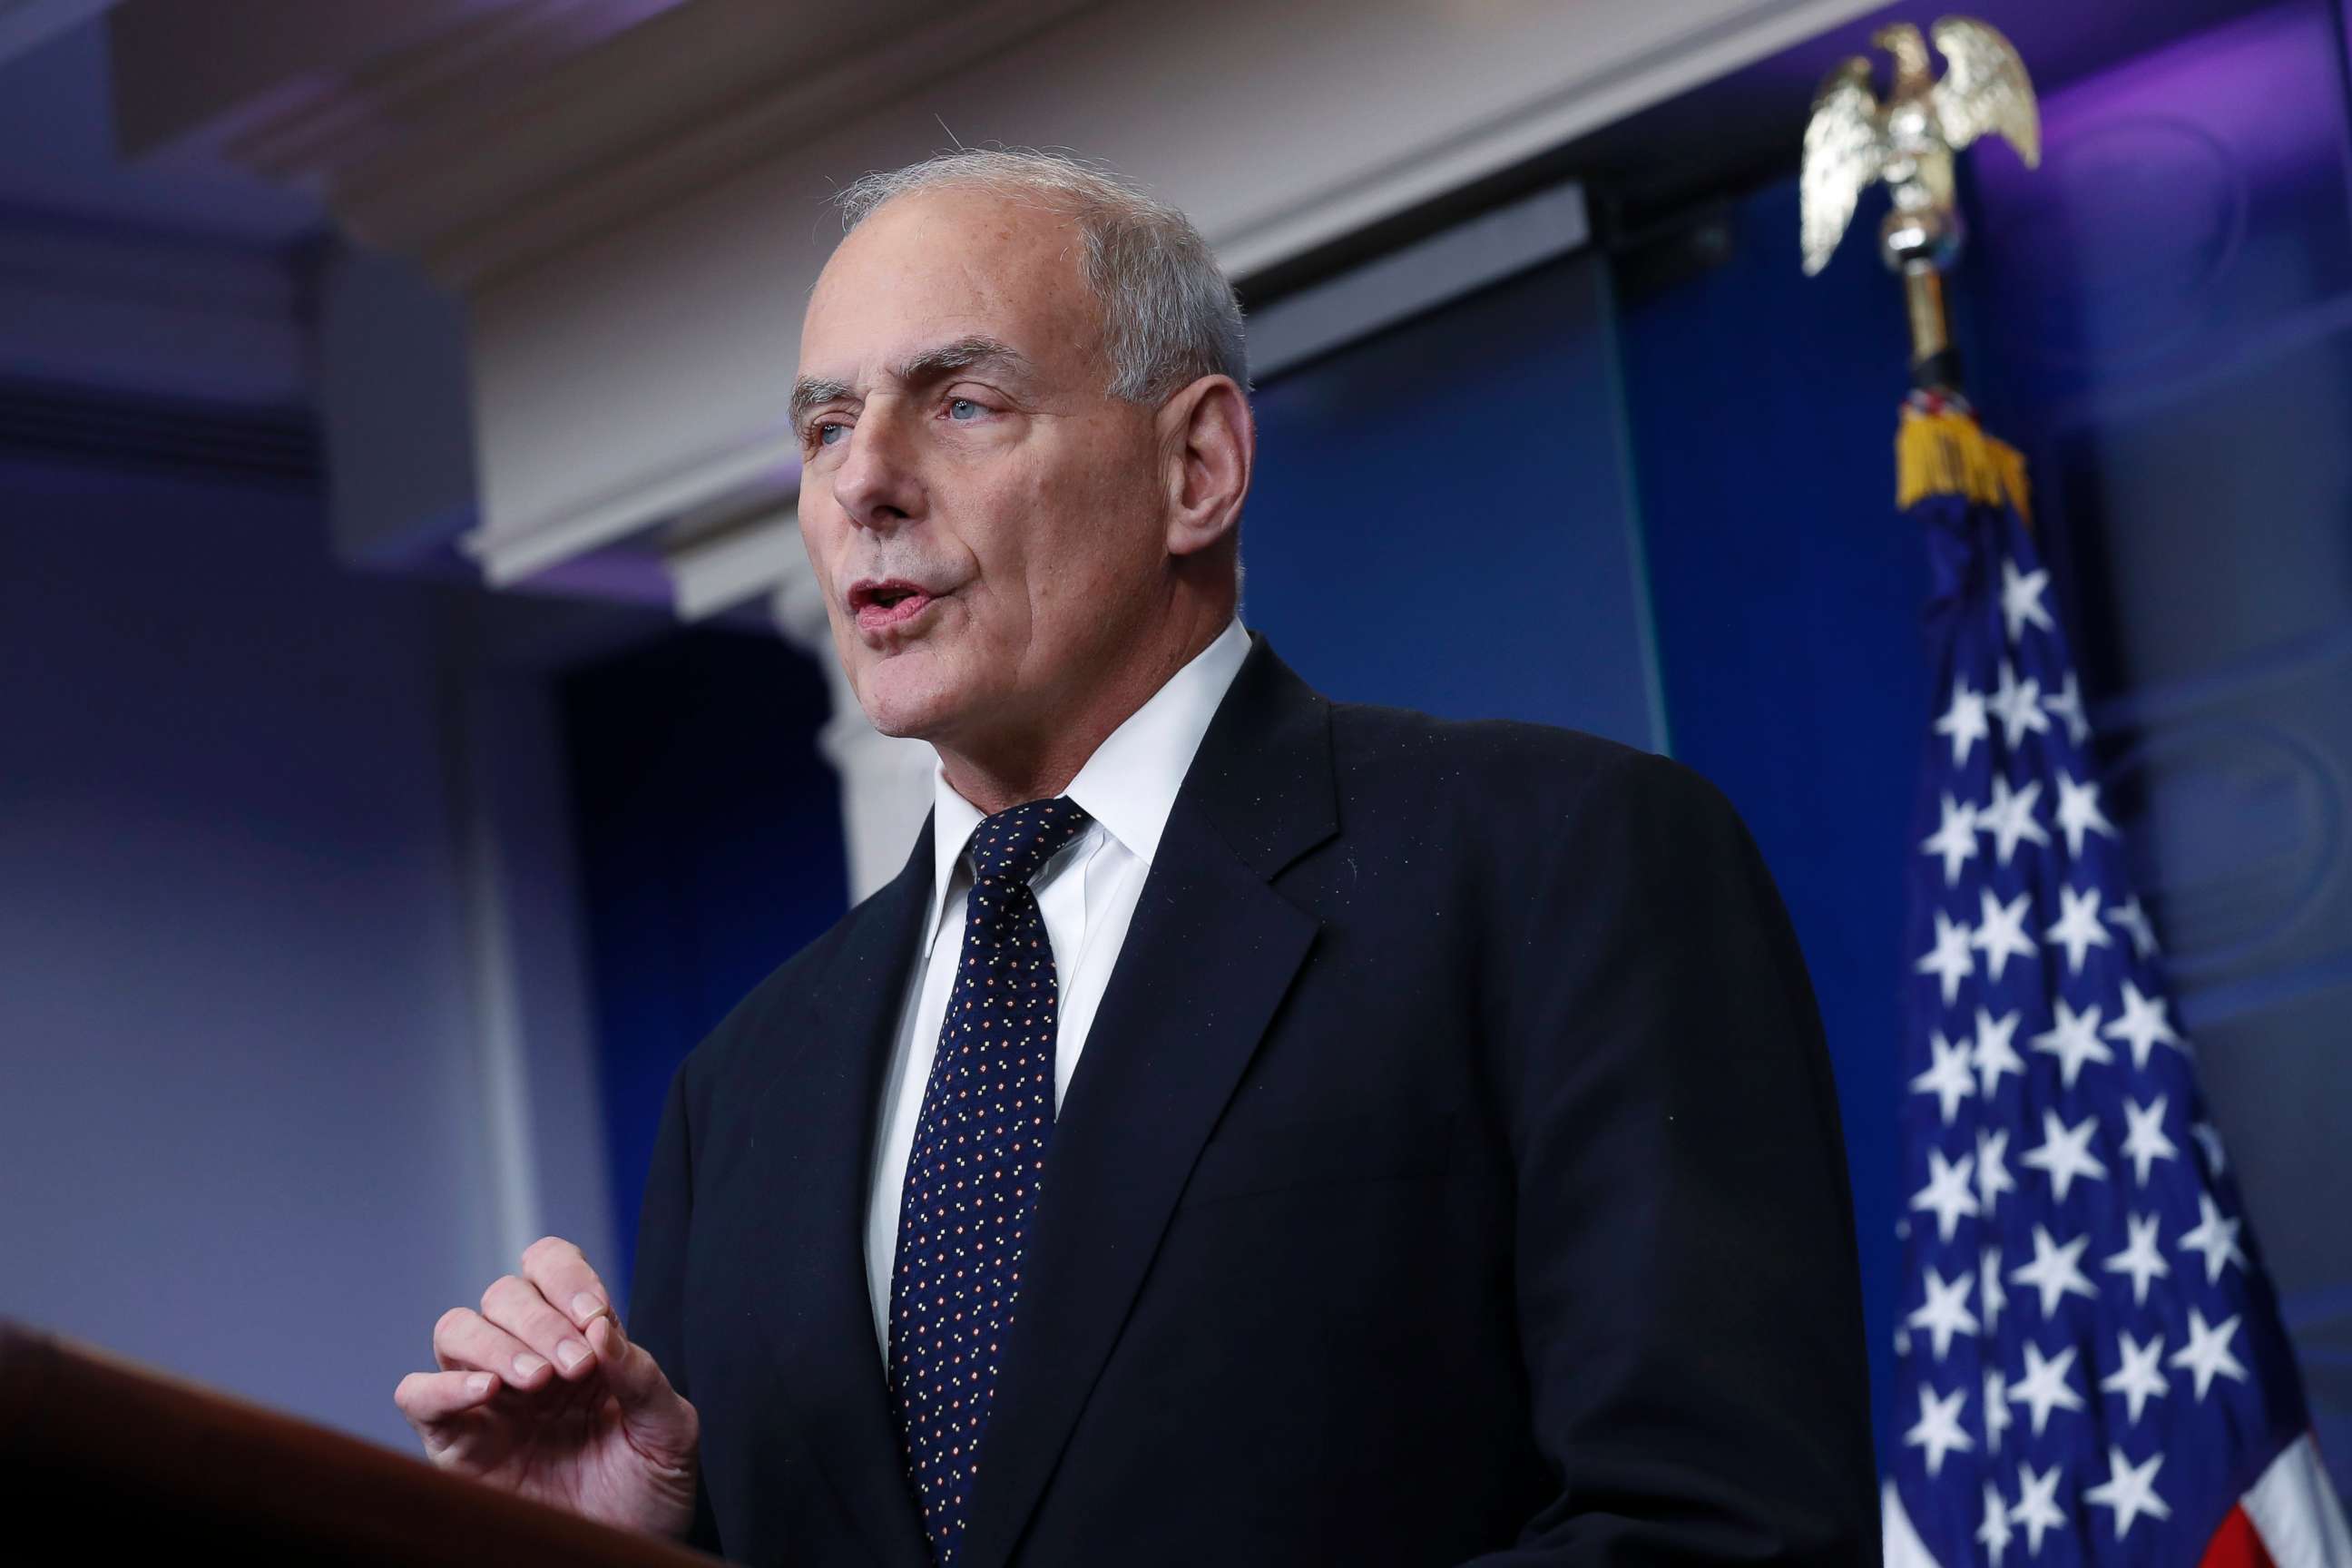 PHOTO: White House Chief of Staff John Kelly responds to a question from the news media during the White House daily briefing in Washington, Oct. 19, 2017.